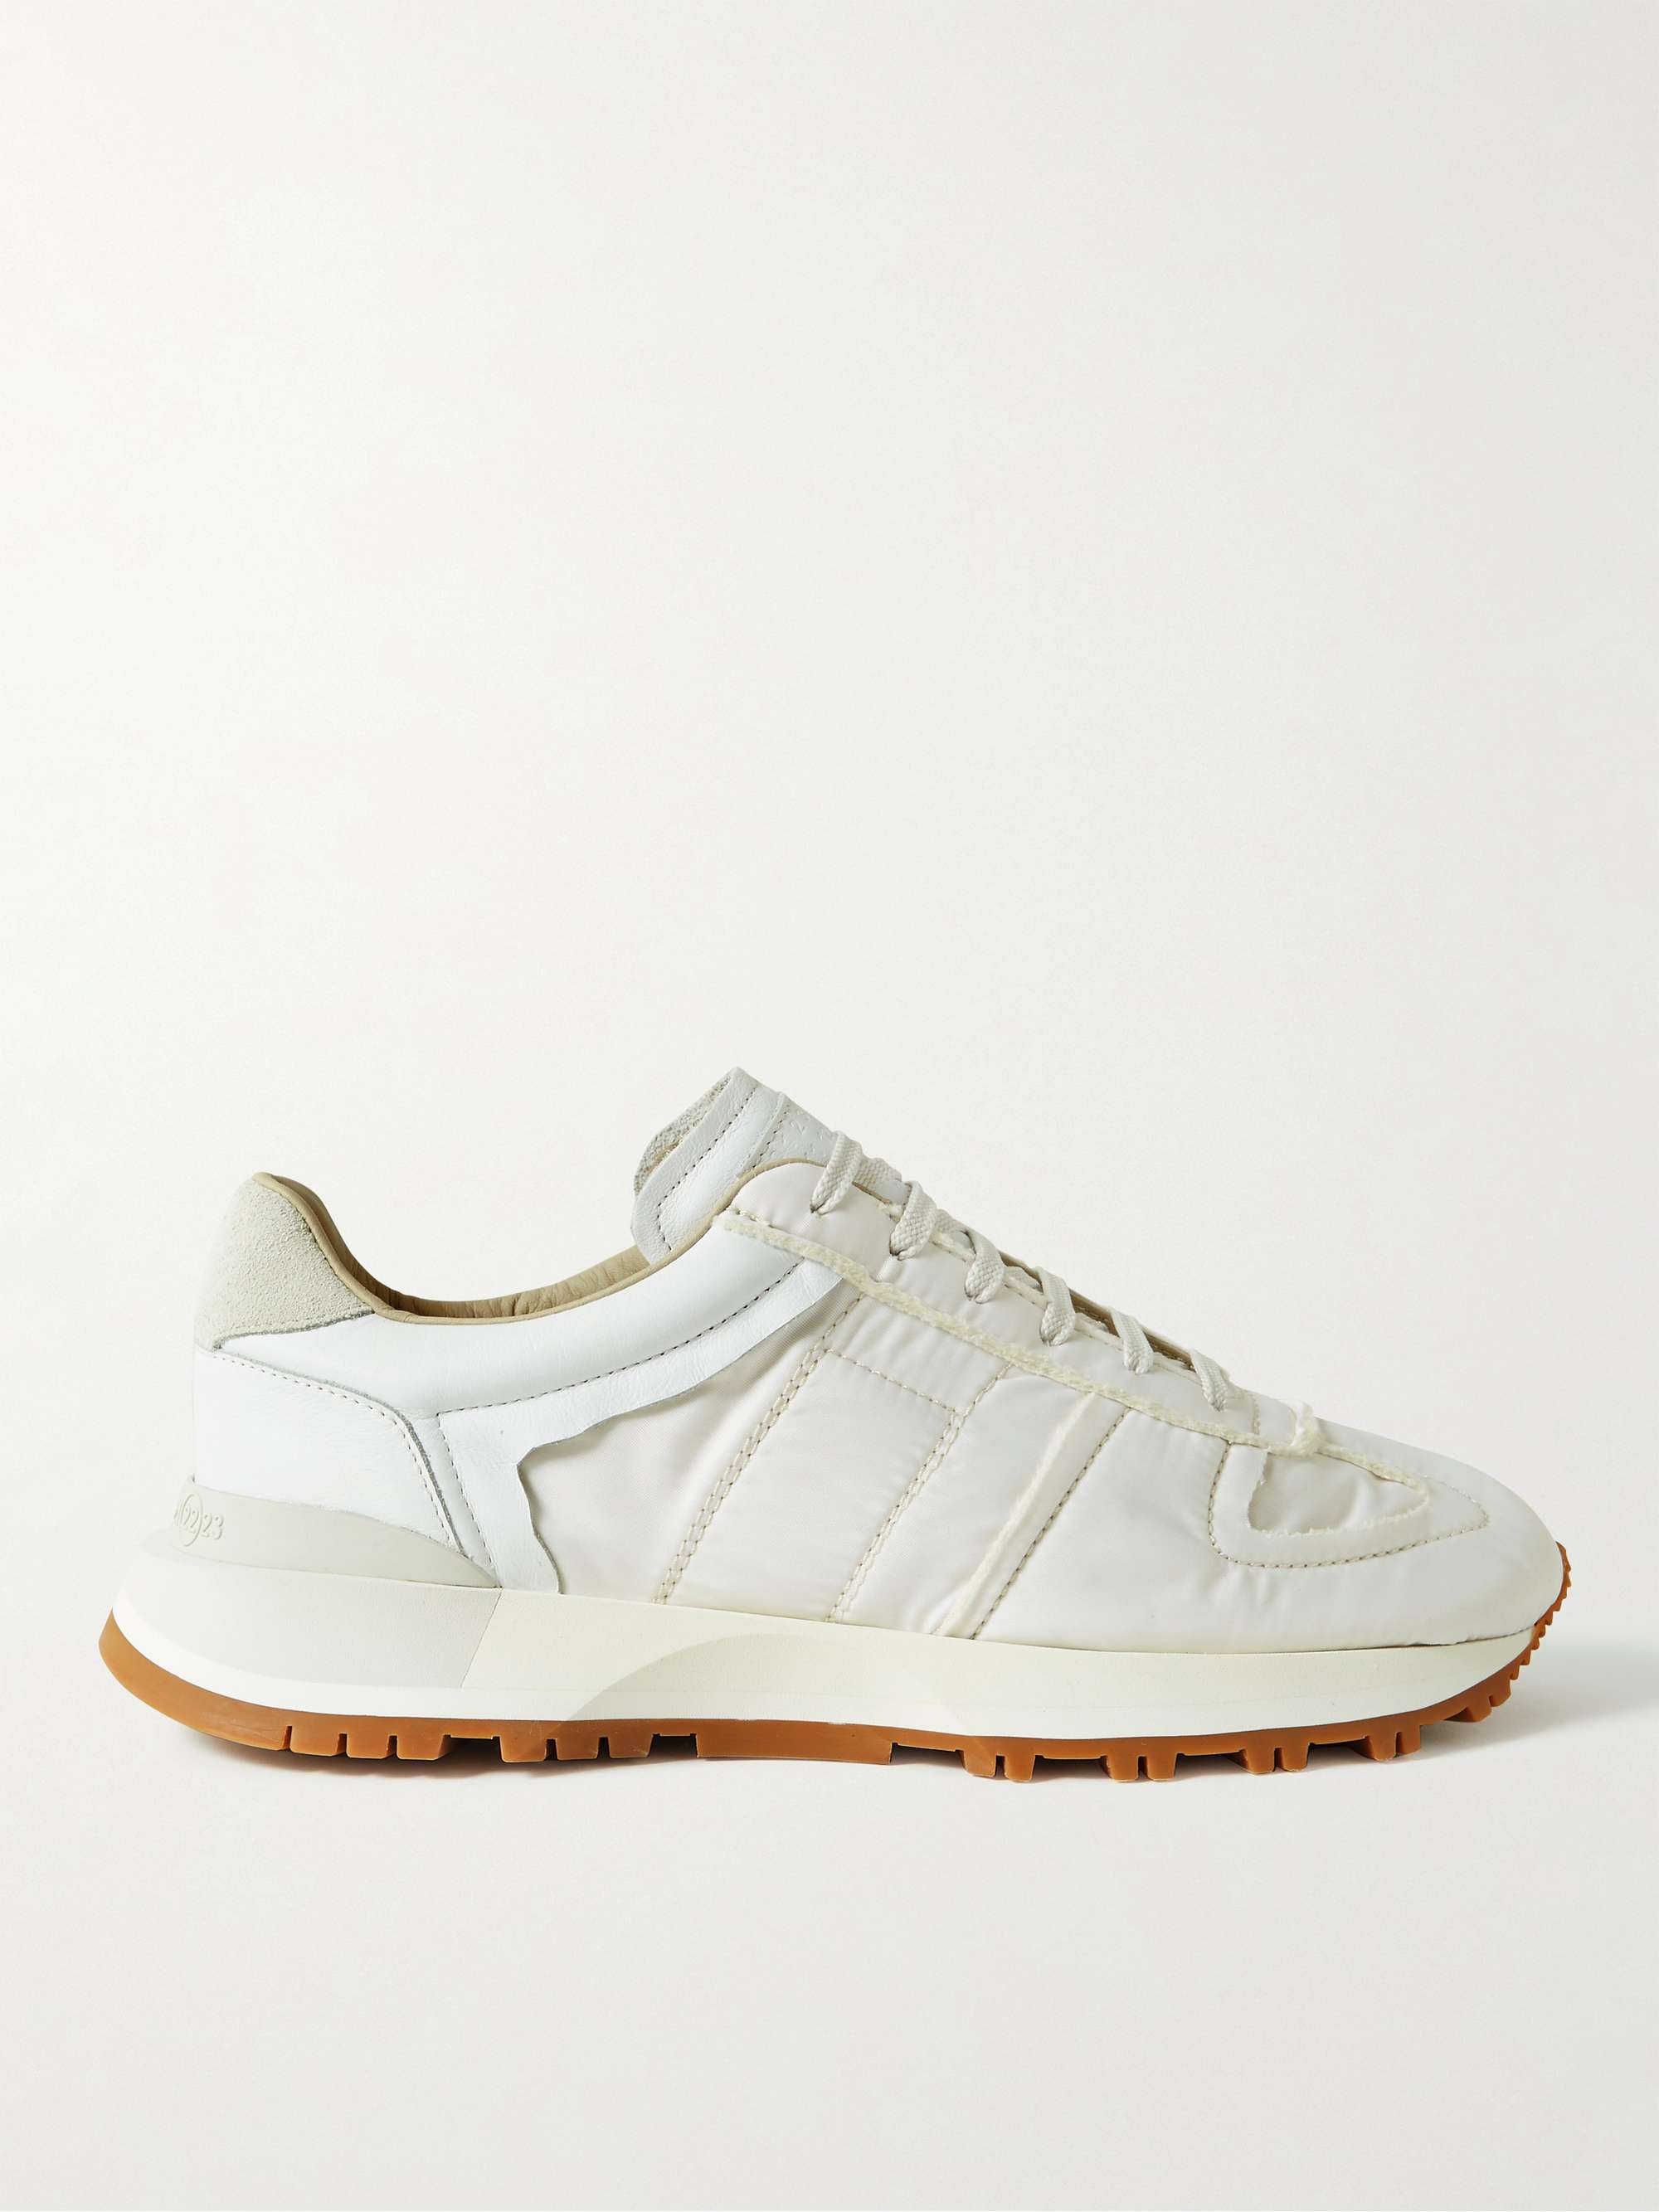 MAISON MARGIELA Runner Suede-Trimmed Leather and Nylon Sneakers | MR PORTER